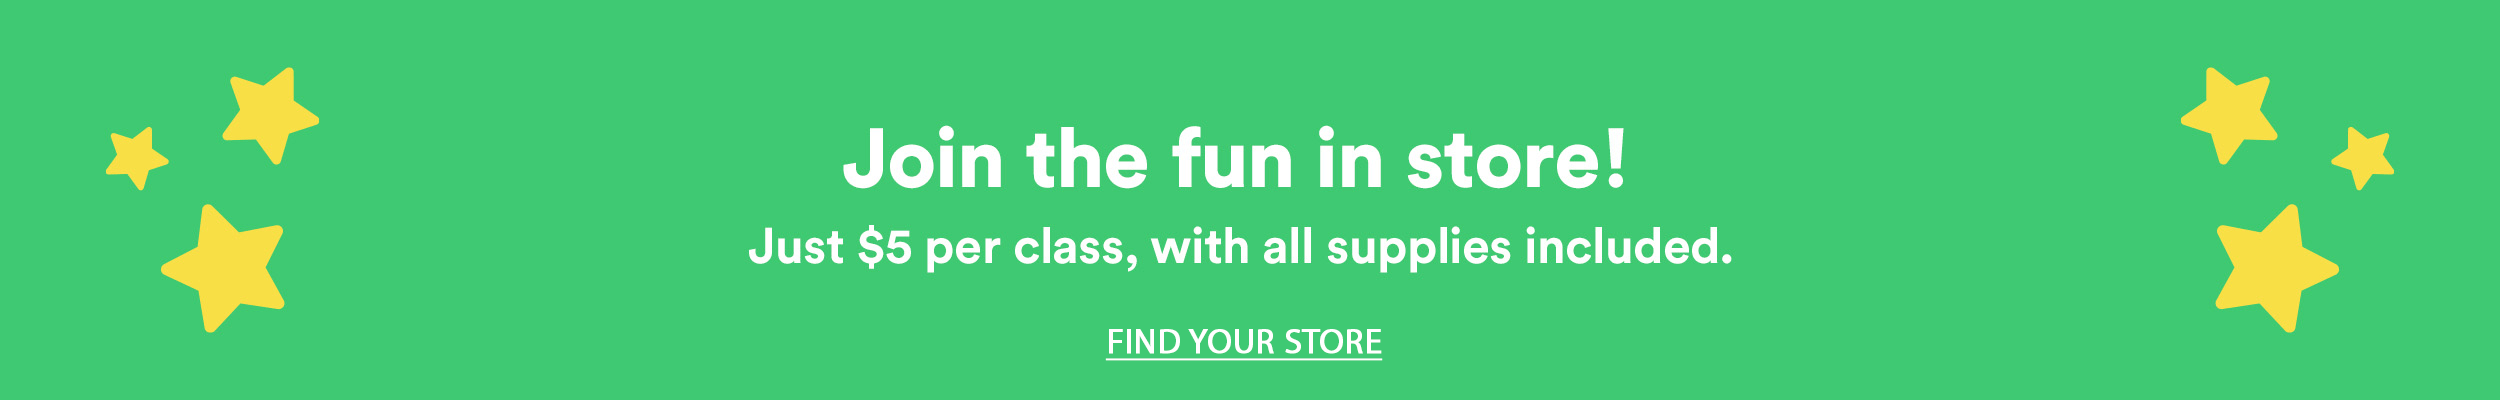 Join the fun in store! Just $5 per class, with all supplies included. Find your store.